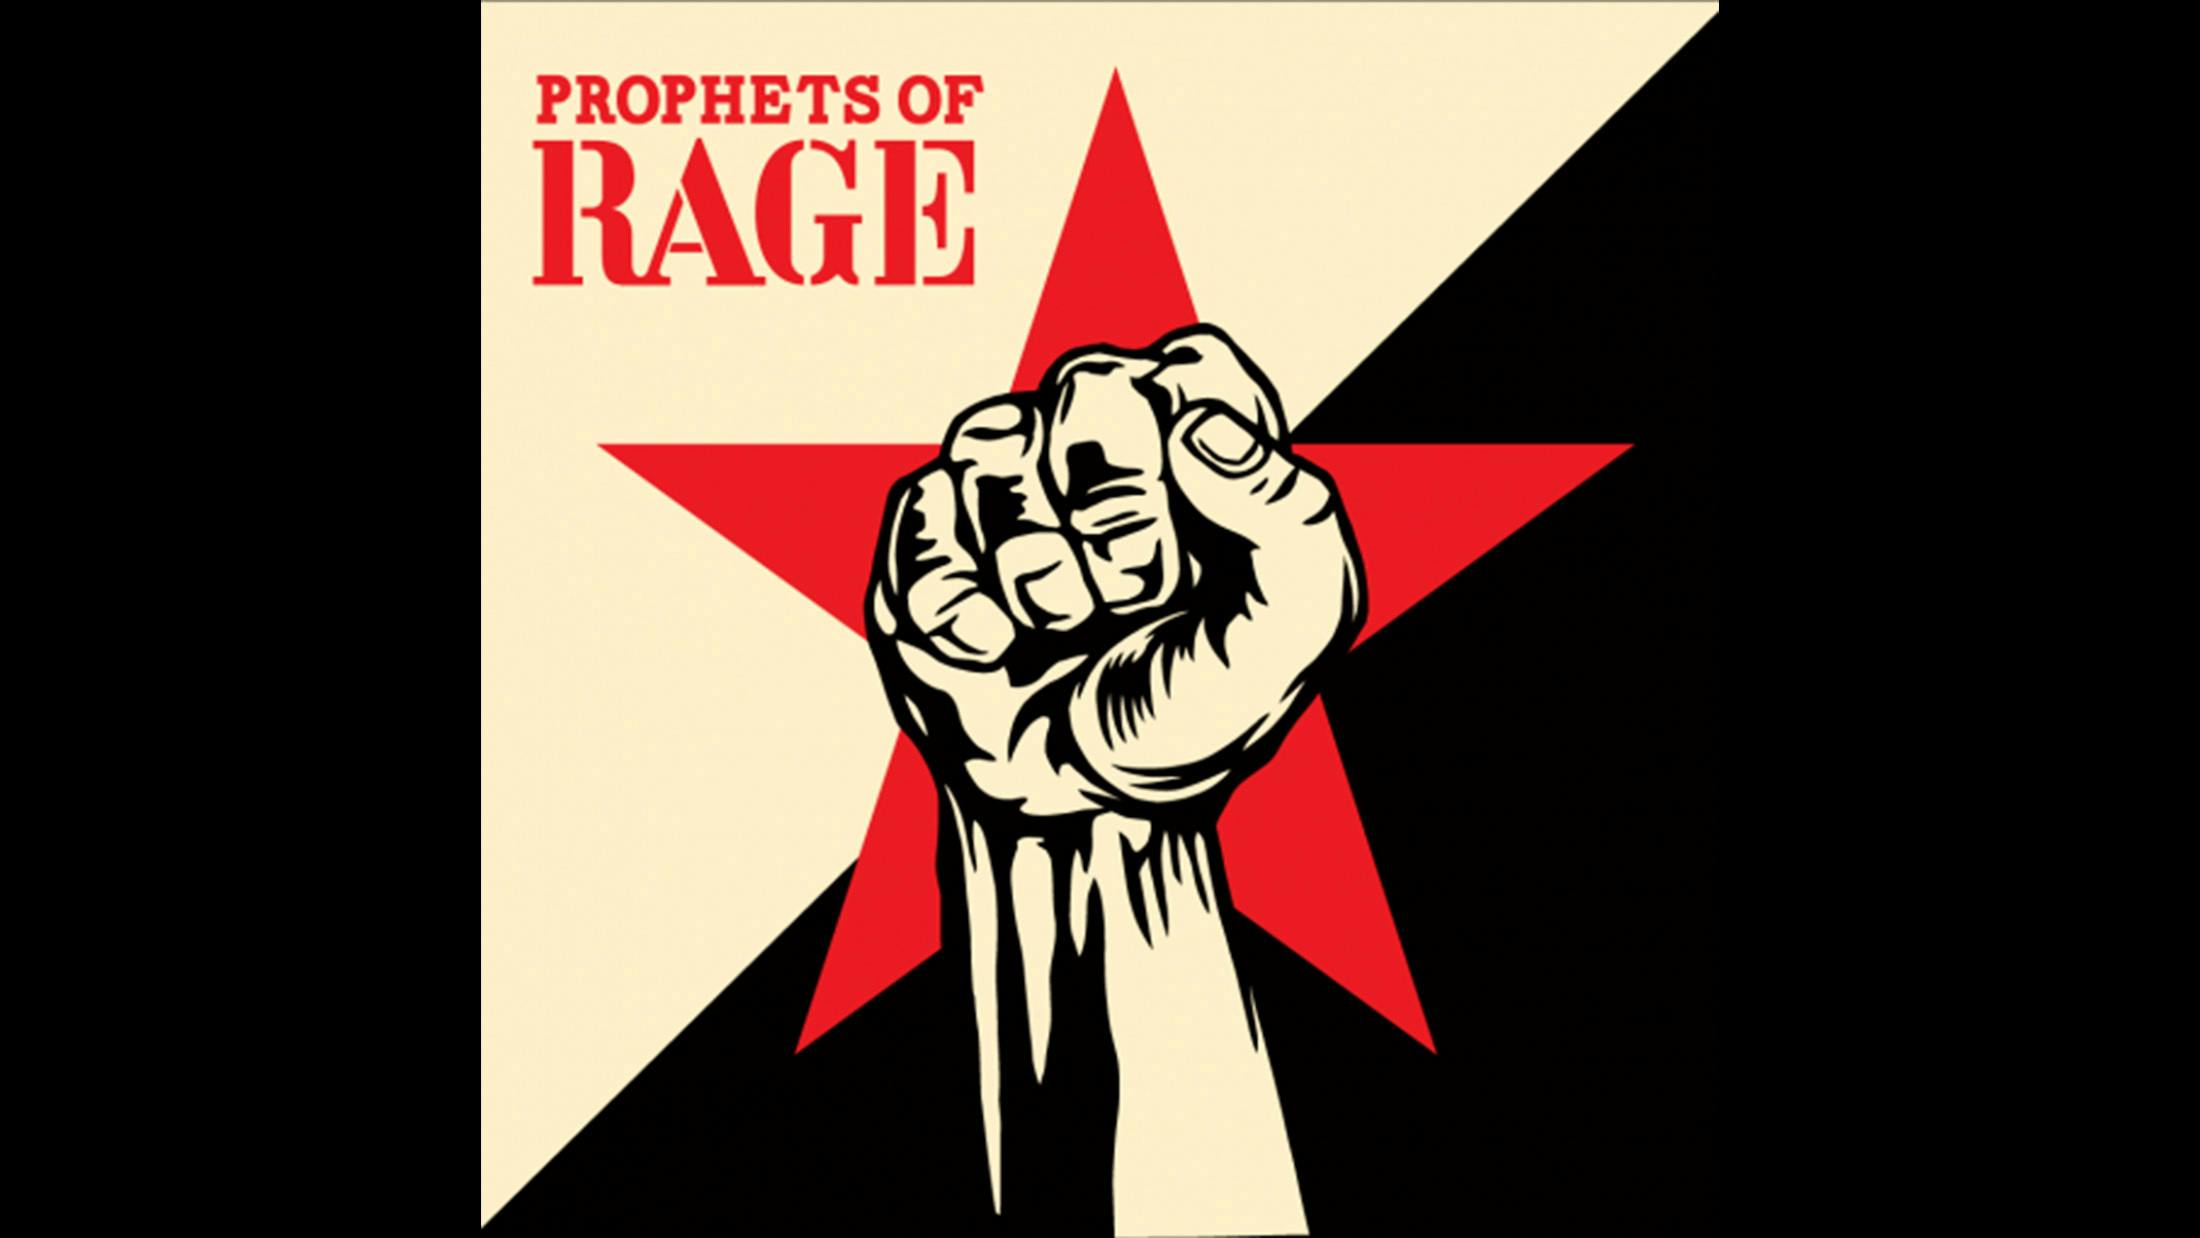 Here to ‘unfuck the world’, PoR defied convention by being a supergroup that lived up to their billing, and this debut served as a thunderbolt of noise in response to these times of social unrest. But even if you ignored the politics, their potent formula of Chuck D and B-Real’s rap attack, plus three quarters of Rage Against The Machine, was electrifying.